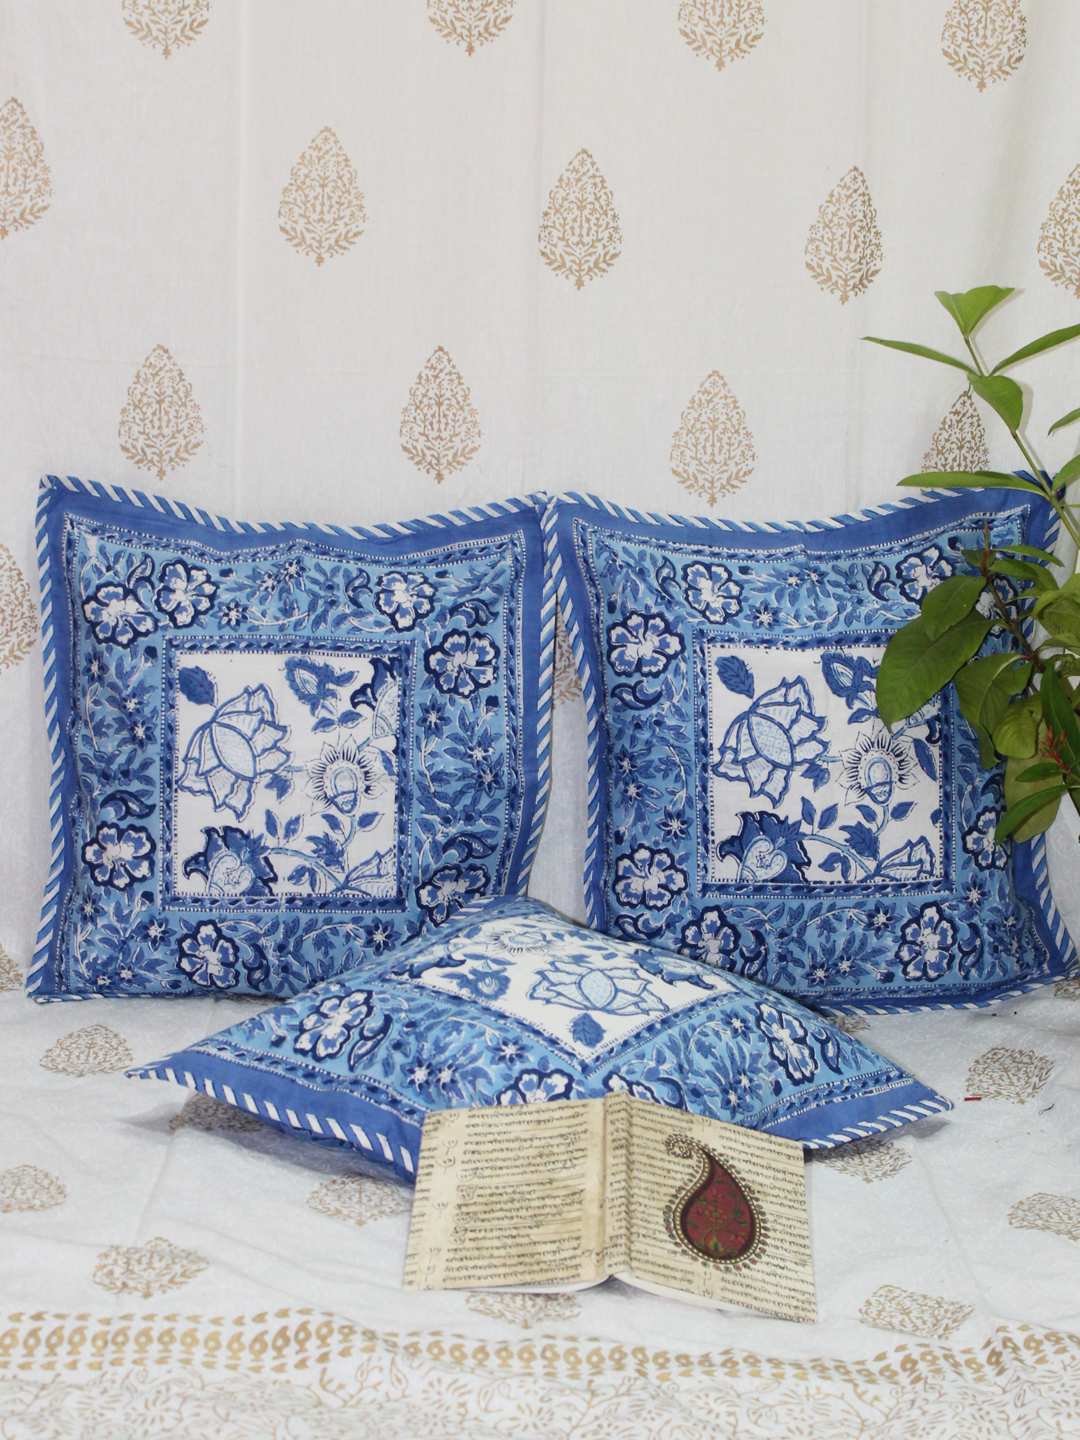 Cotton Floral Jaal Hand Block Printed Cushion Cover in Blue & White